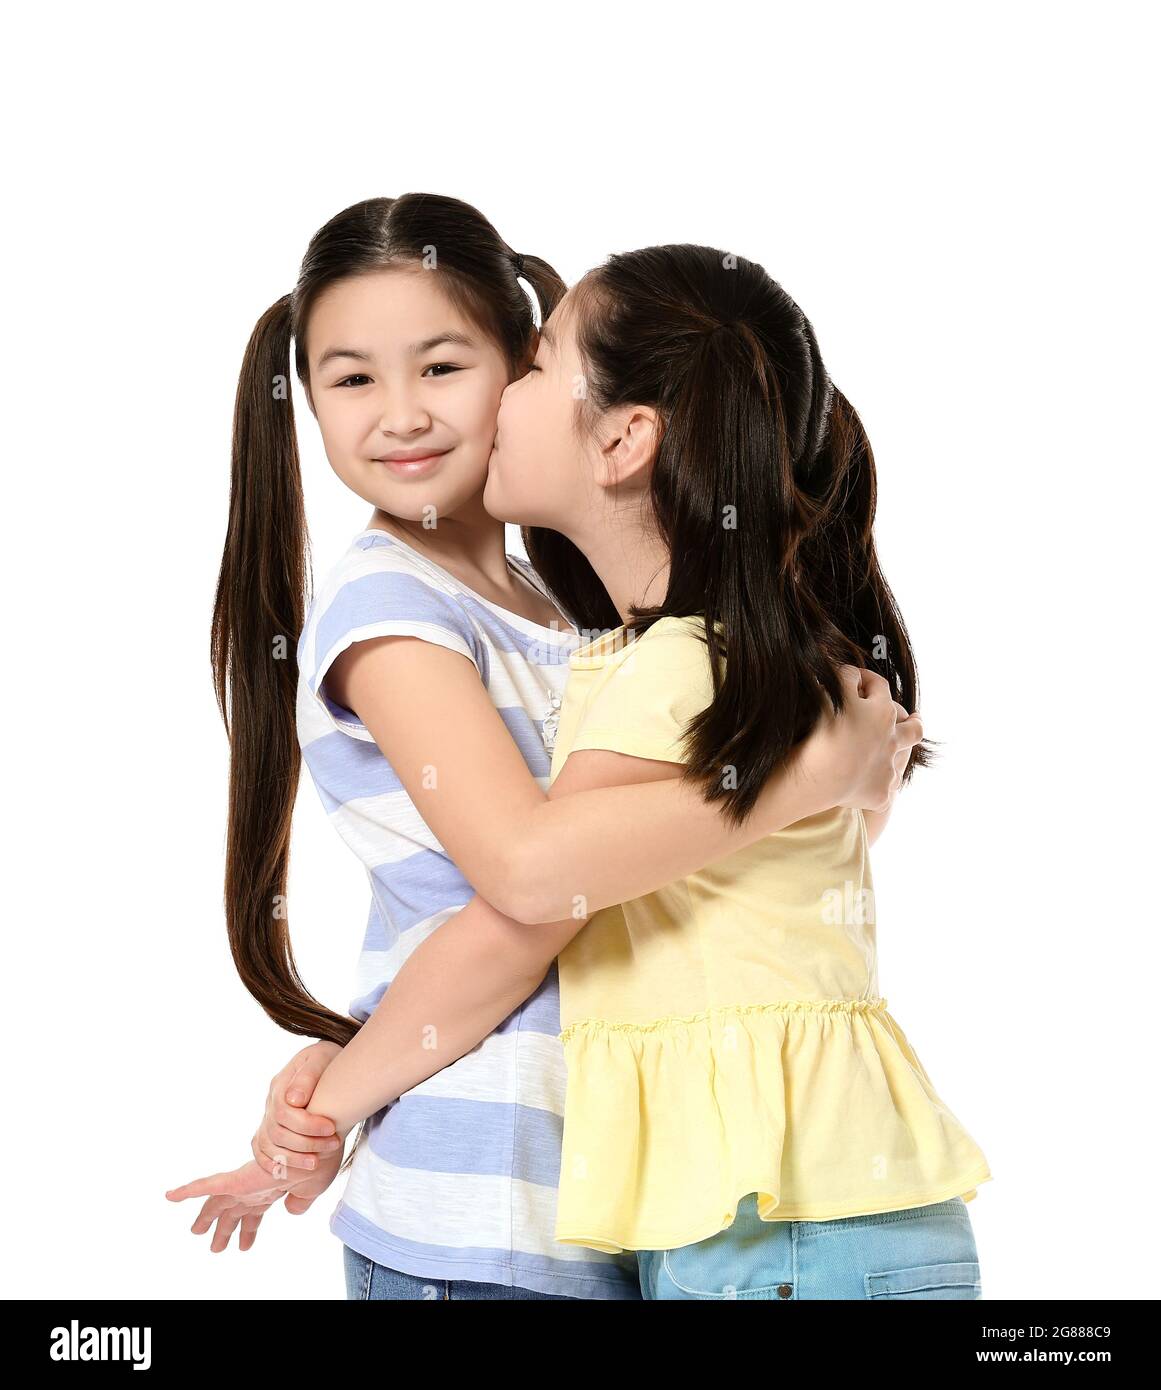 Cute Asian sisters on white background Stock Photo